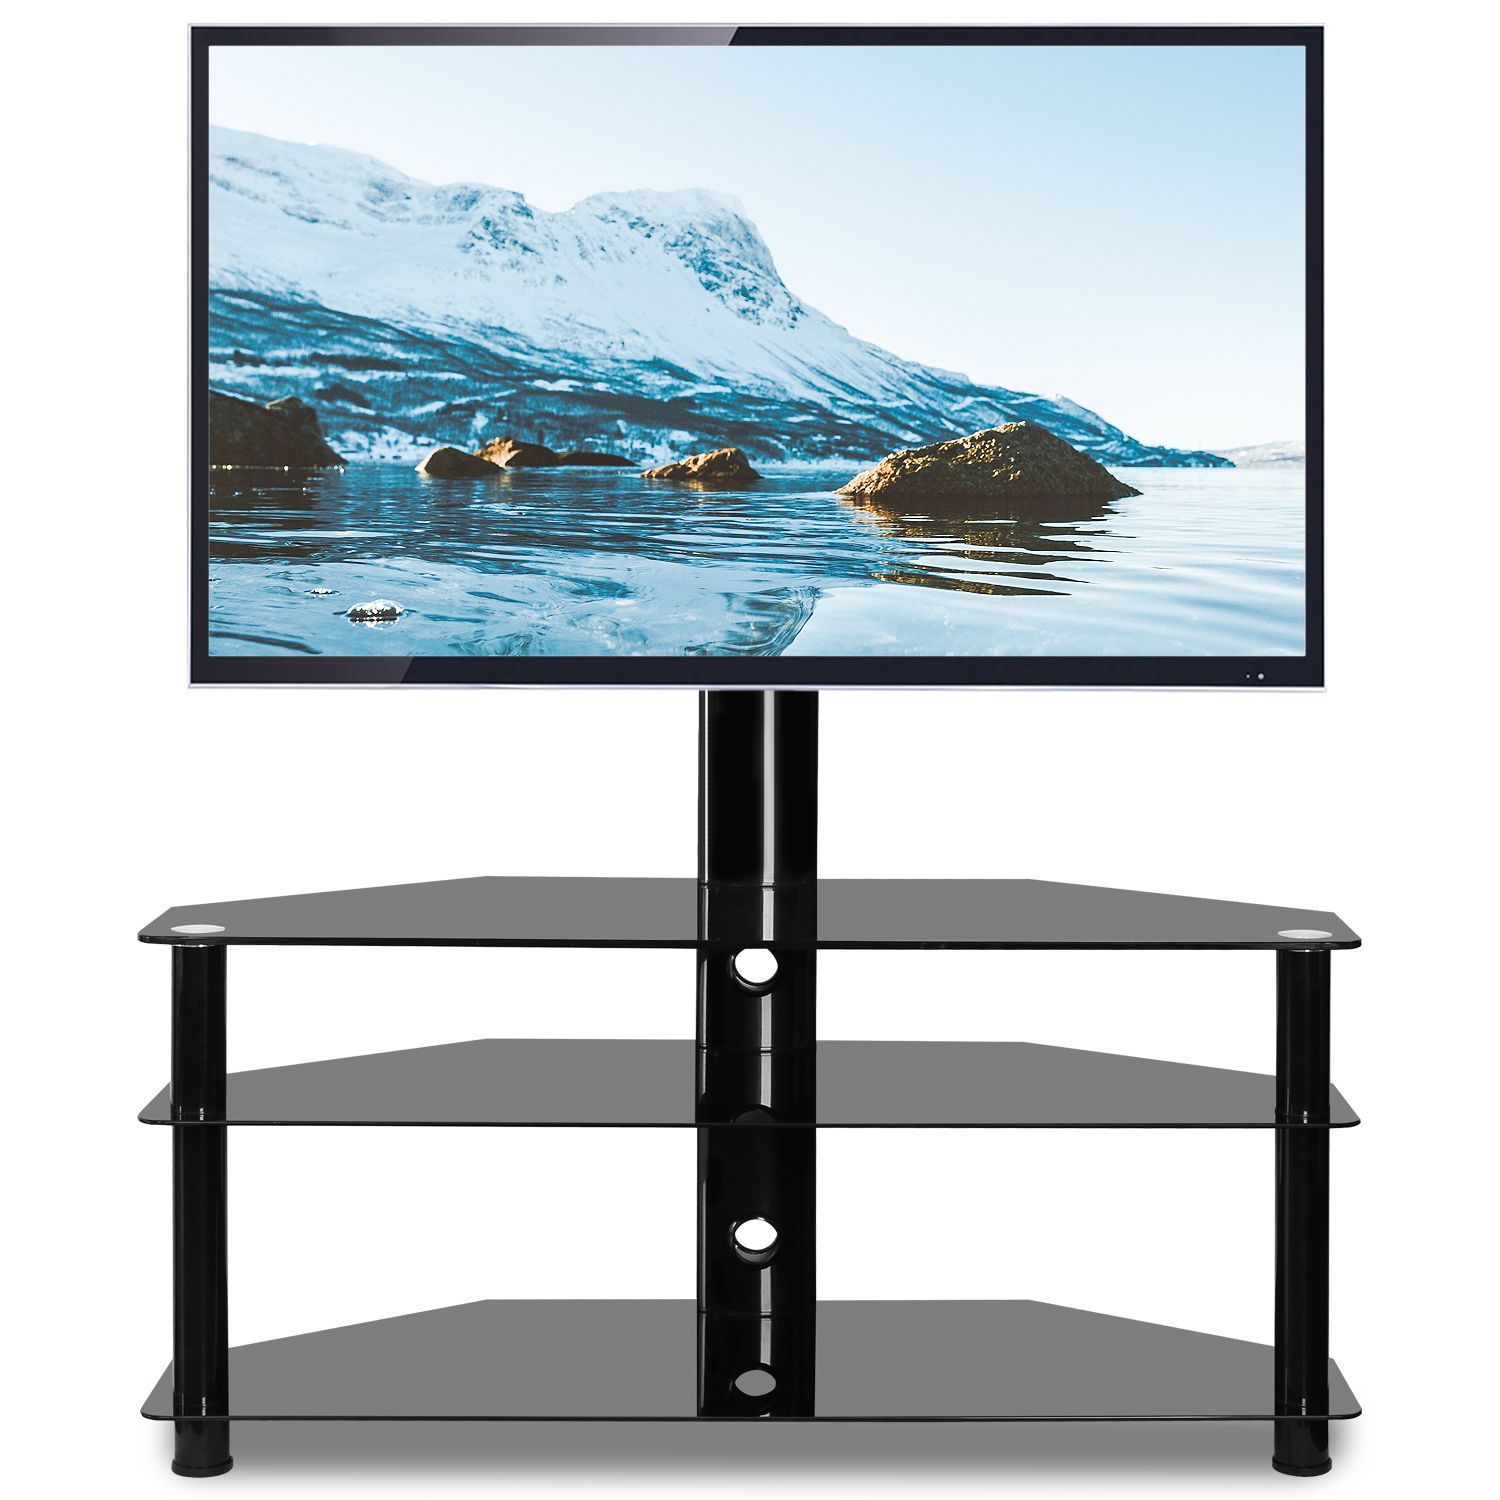 Rfiver 3 Shelf Corner Floor Tv Stand With Swivel Mount For Corner Tv Stands With Bracket (View 6 of 15)